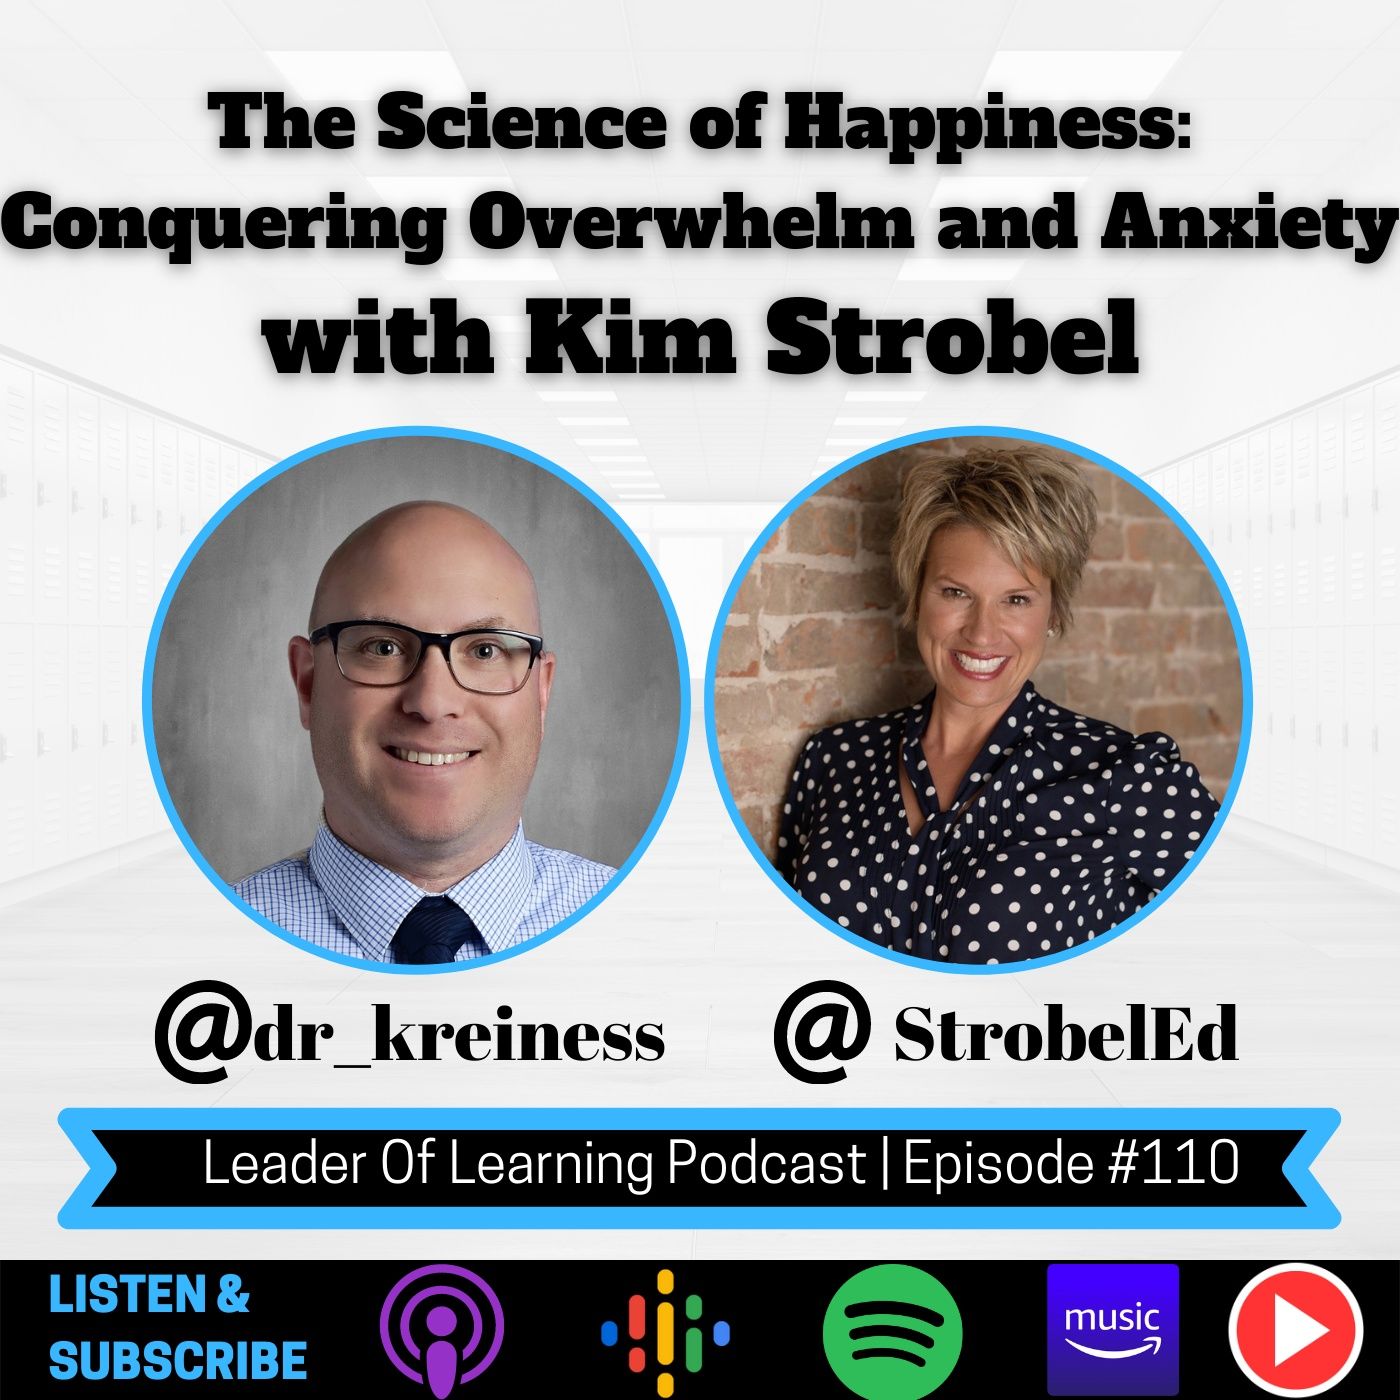 The Science of Happiness: Conquering Overwhelm and Anxiety with Kim Strobel Image